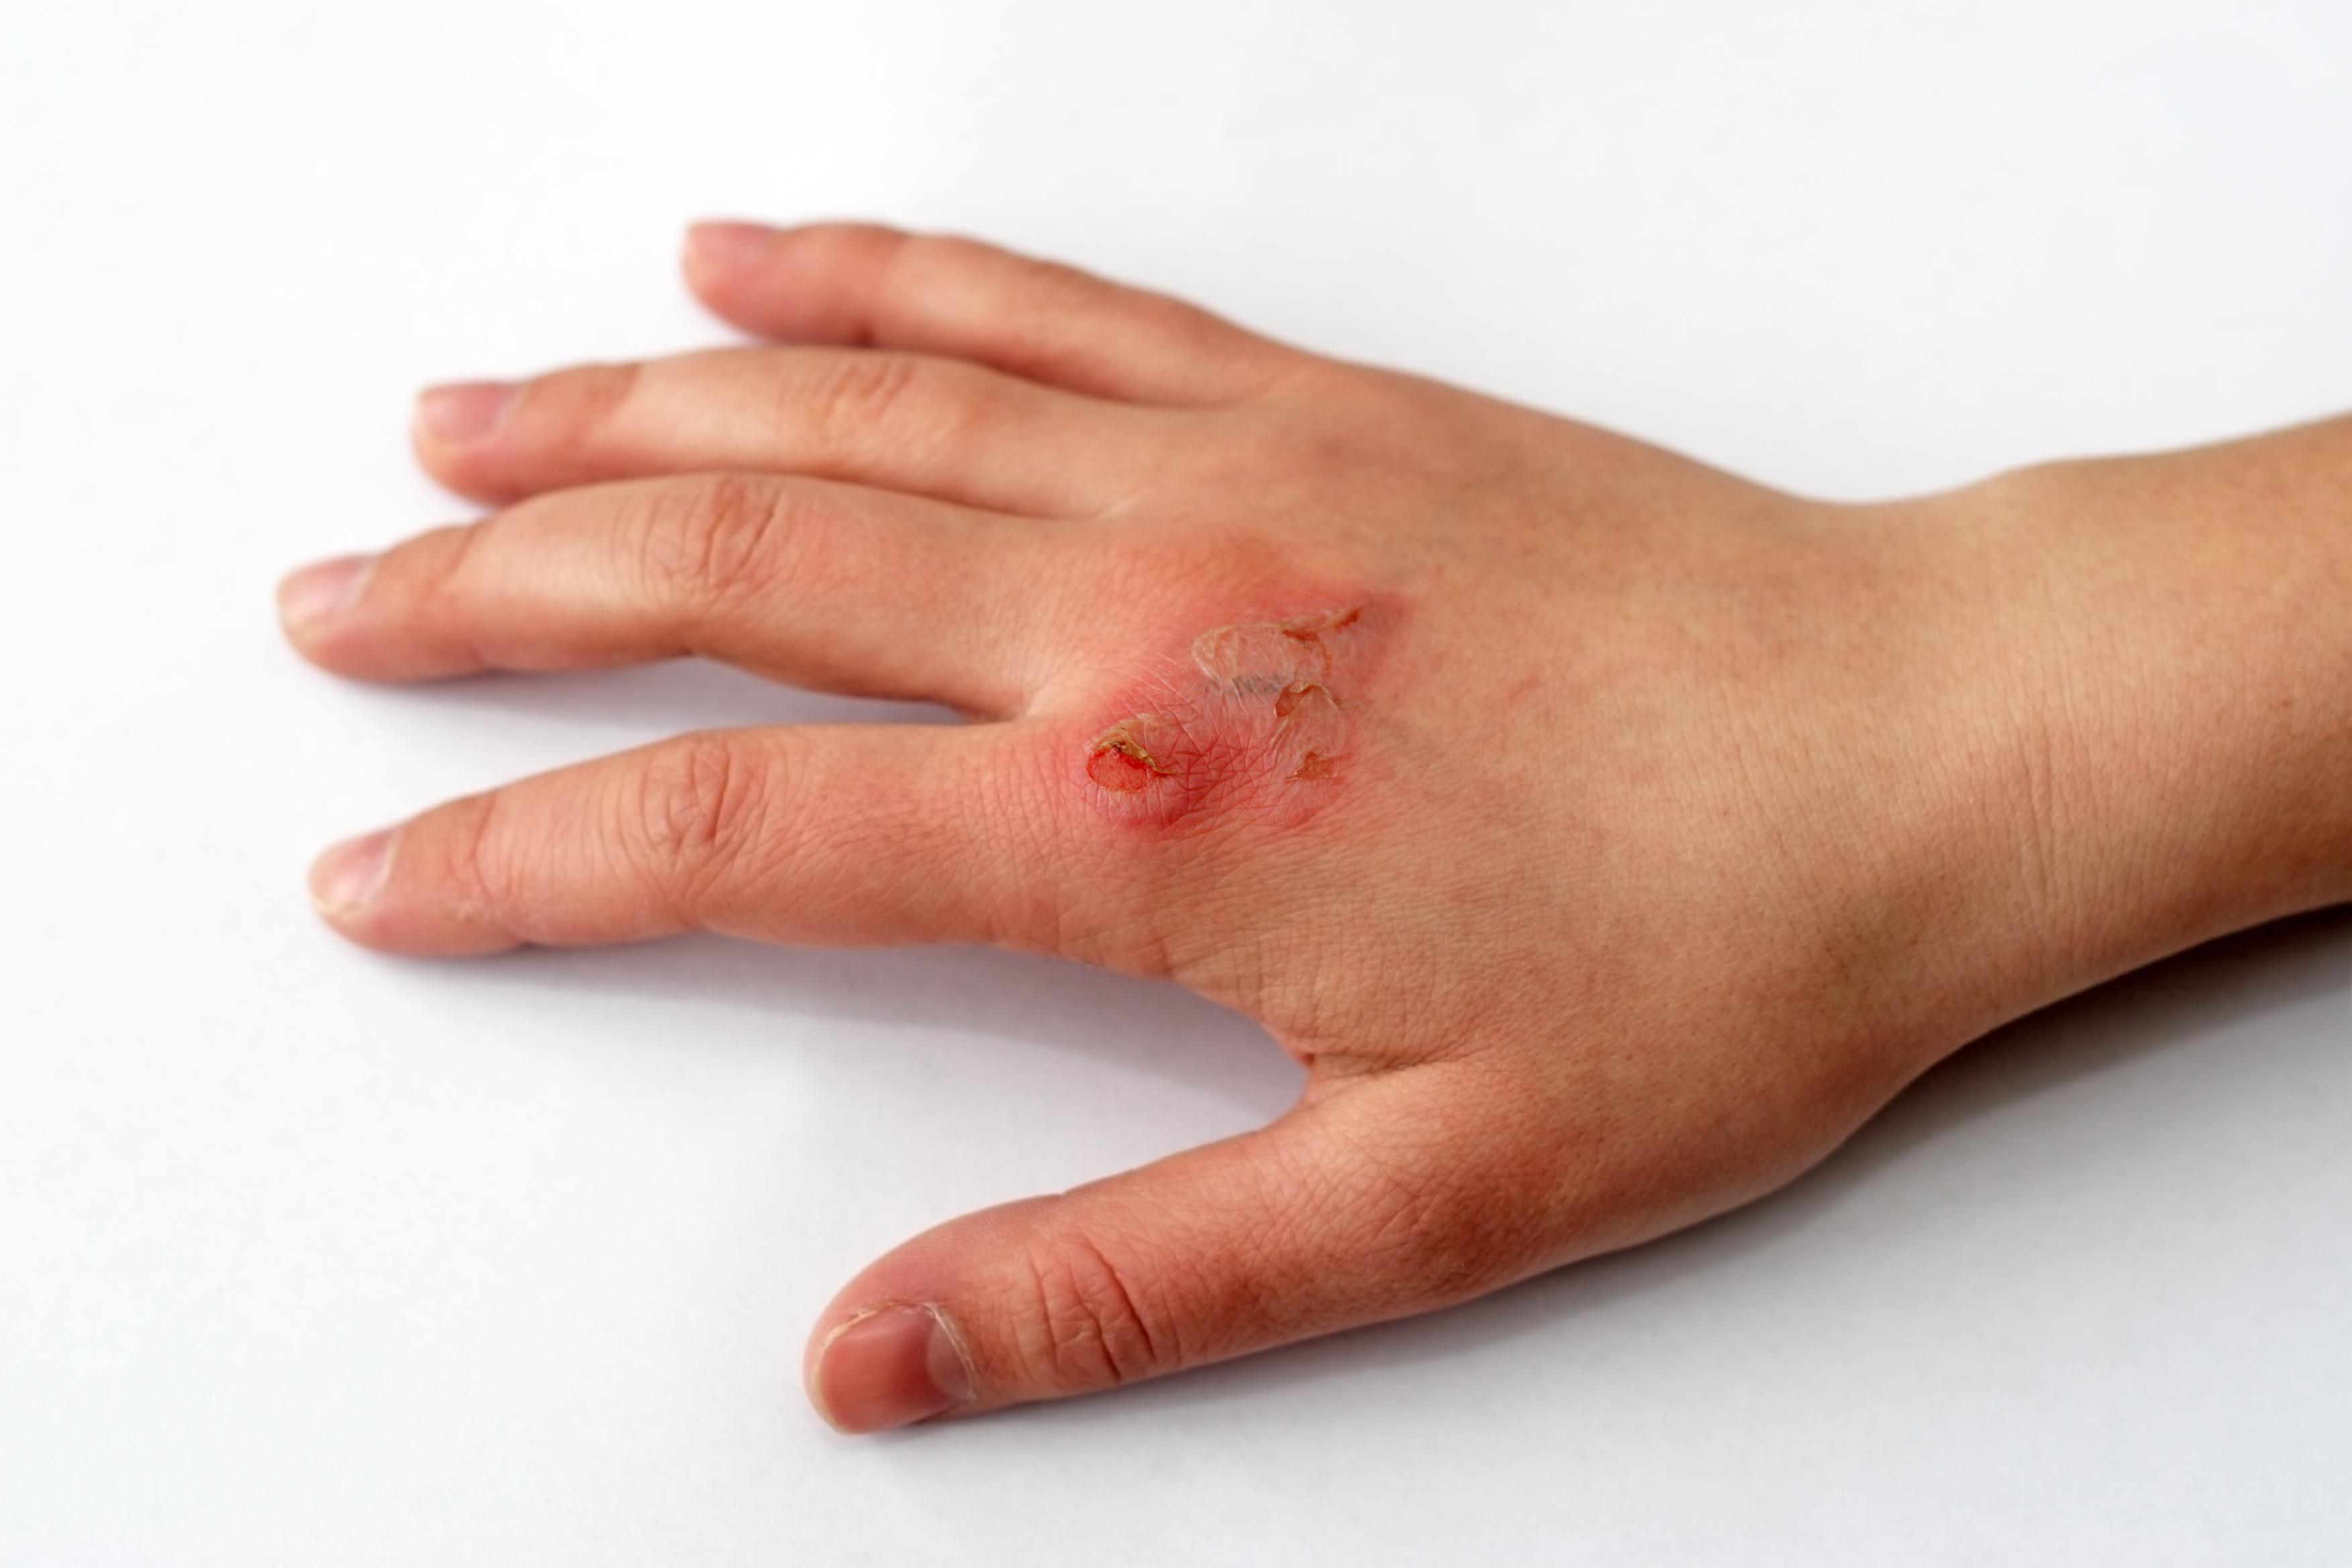 American Emergency Departments’ Epidemiology of Hand and Finger Lacerations